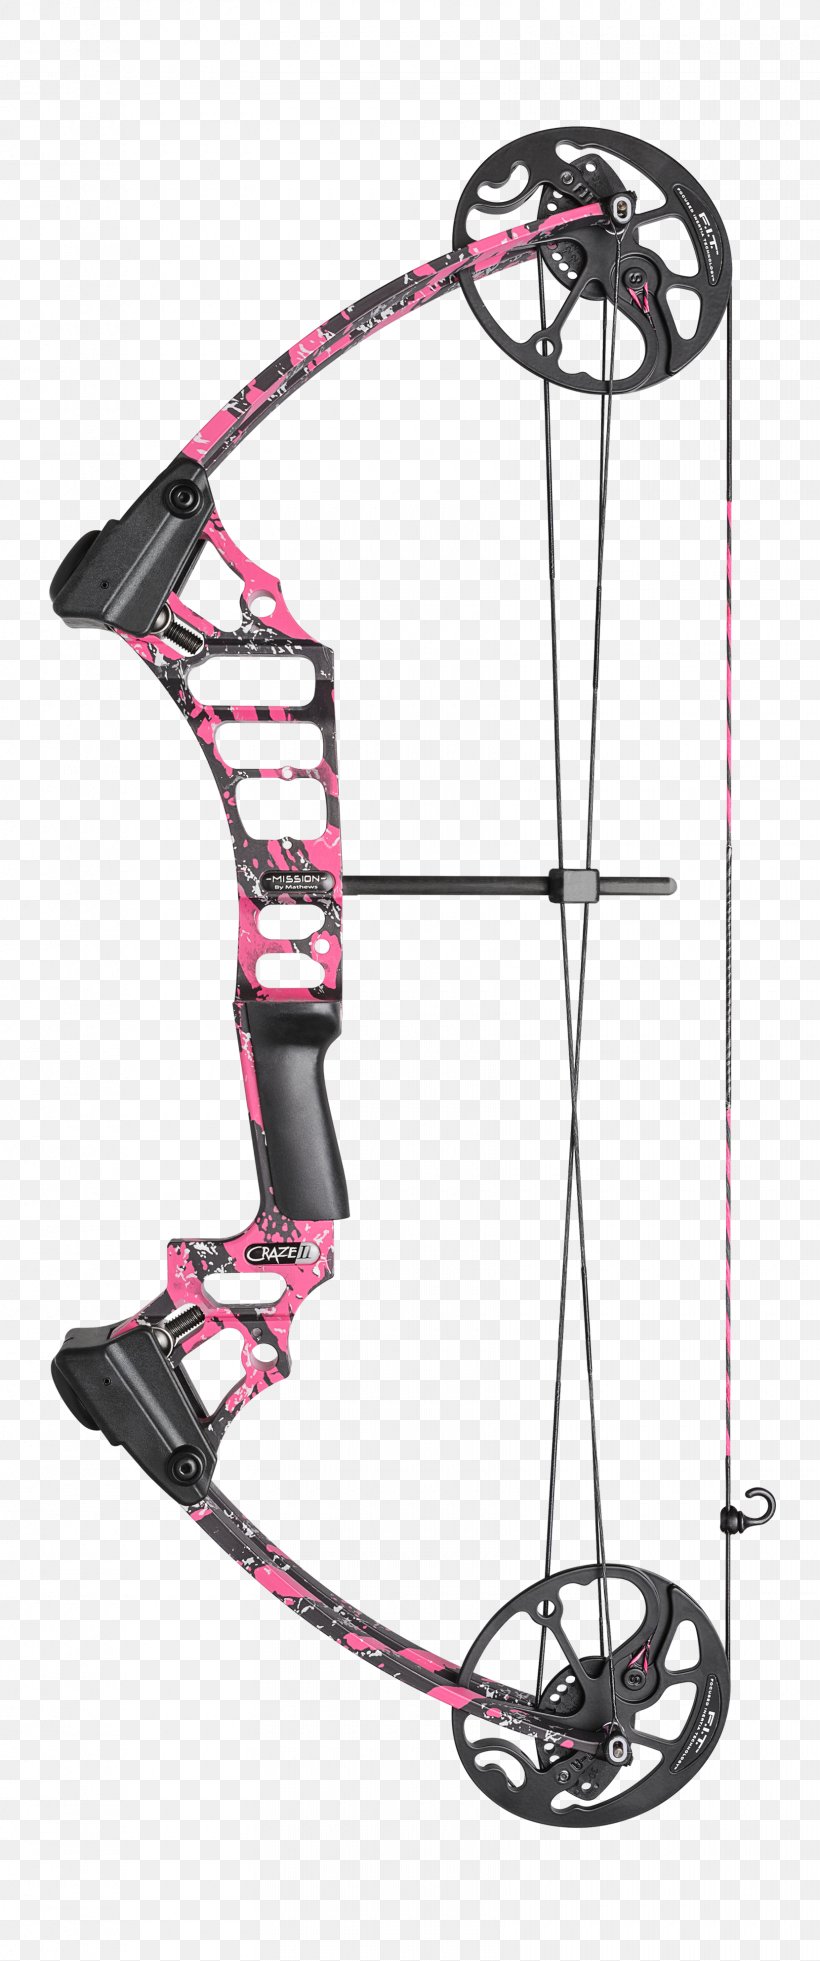 Compound Bows Archery Bow And Arrow Bowhunting, PNG, 1660x3970px, Compound Bows, Archery, Bow And Arrow, Bowhunting, Color Download Free